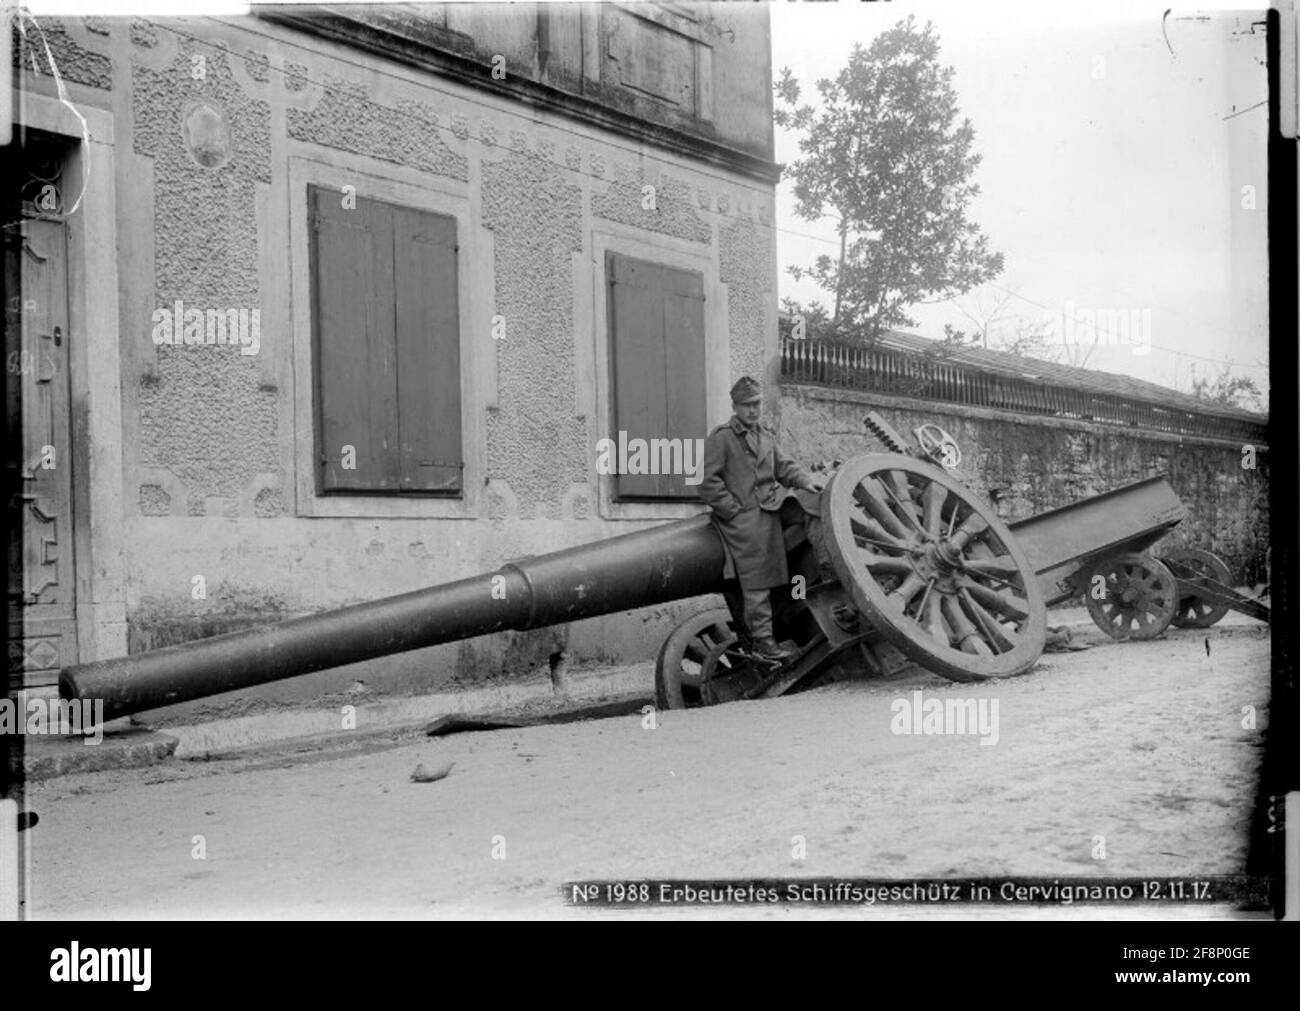 Captured naval cannon in Cervignano Isonzo front, ca. 15 kilometres west of Monfalcone; photographer: Krieg Vermessung 5. Stock Photo